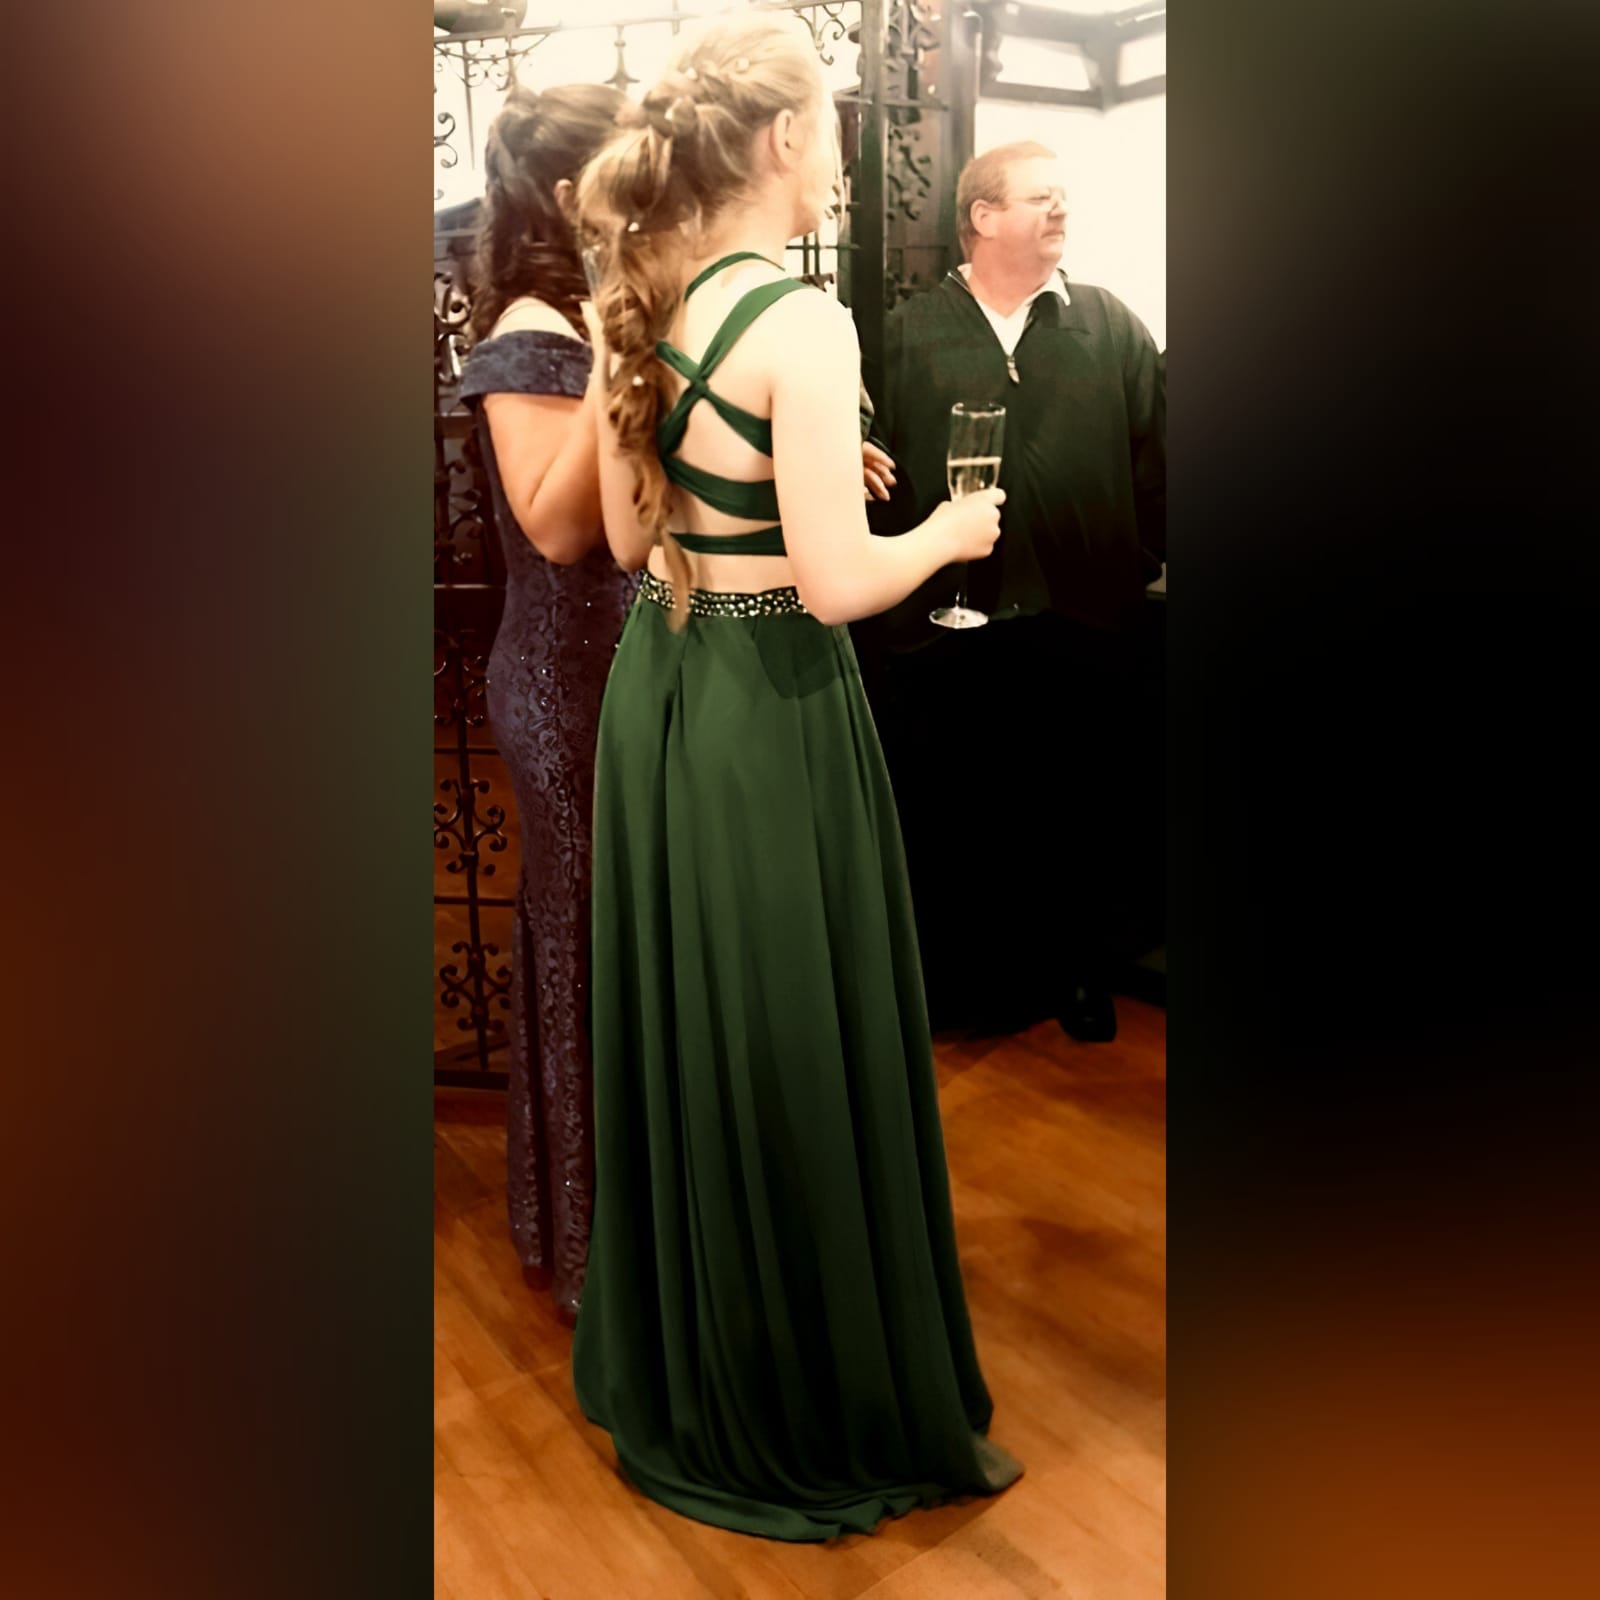 Olive green 2 piece matric dance dress 7 olive green 2 piece matric dance dress. Flowy long chiffon shirt with a little train and waistband detailed with silver beads. Pleated crop top with a rounded deep neckline , backless design with strap detail.